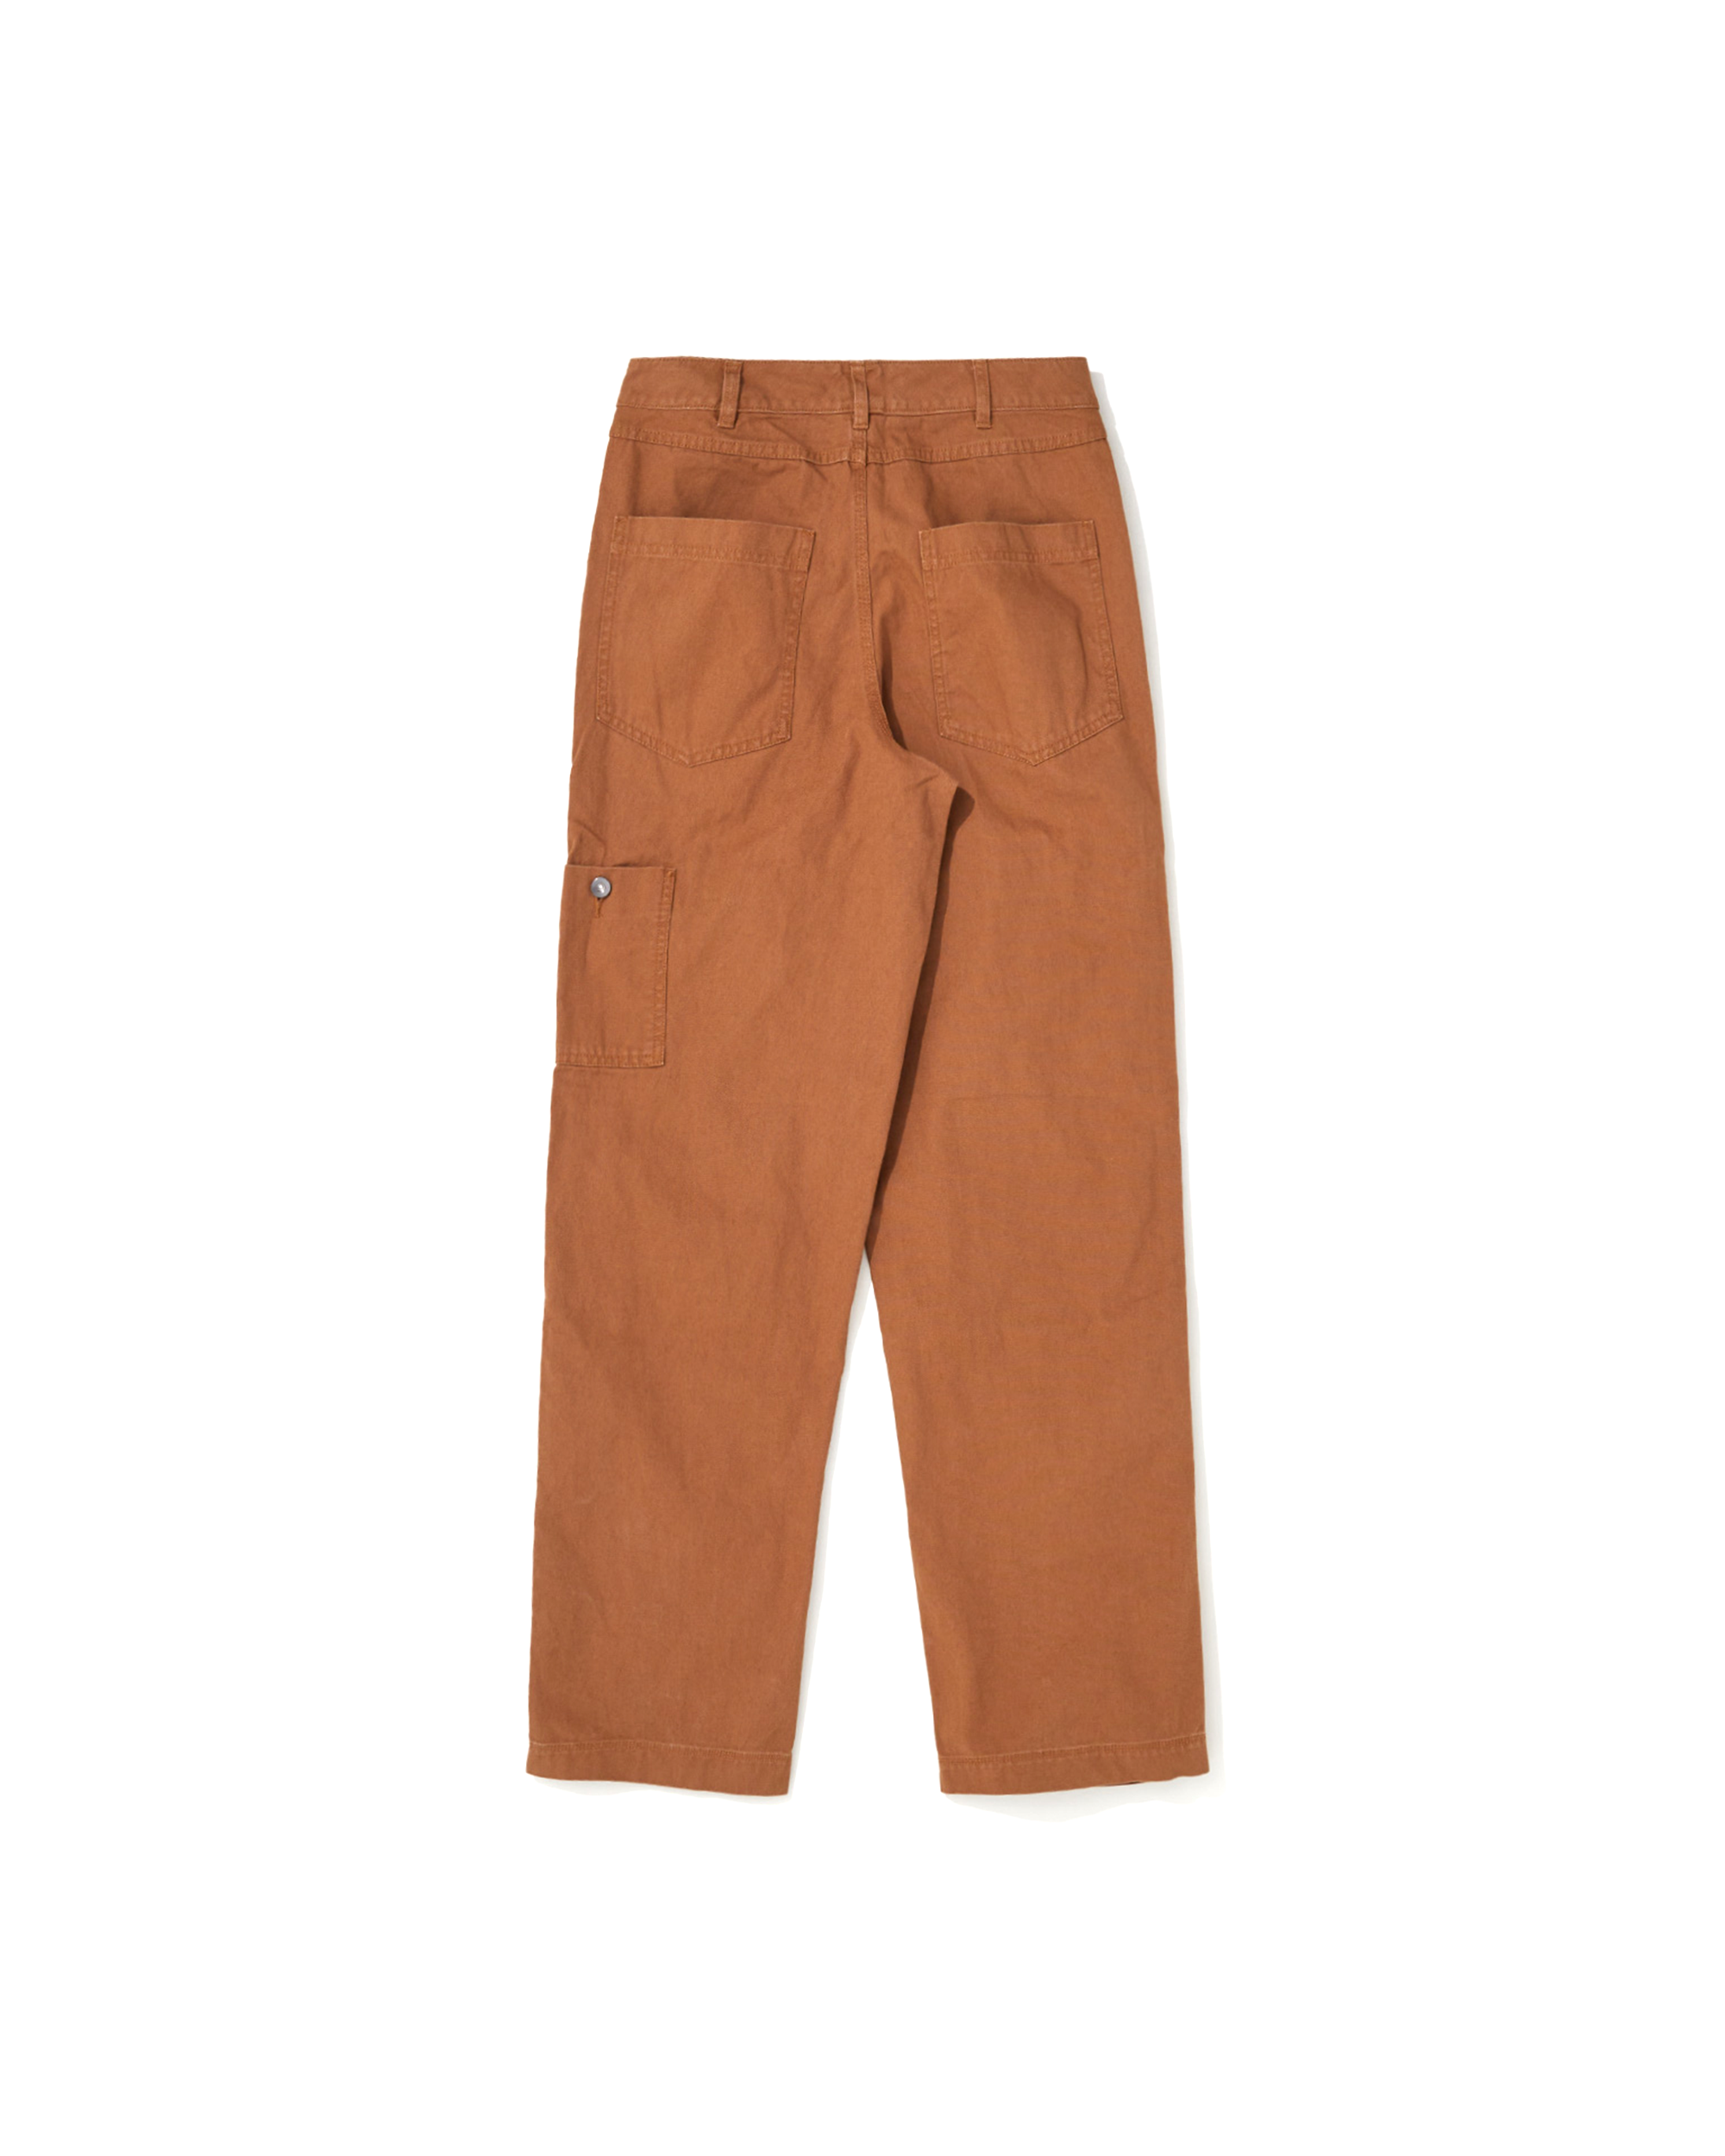 Life Double Panel Pant - Ale Brown / White